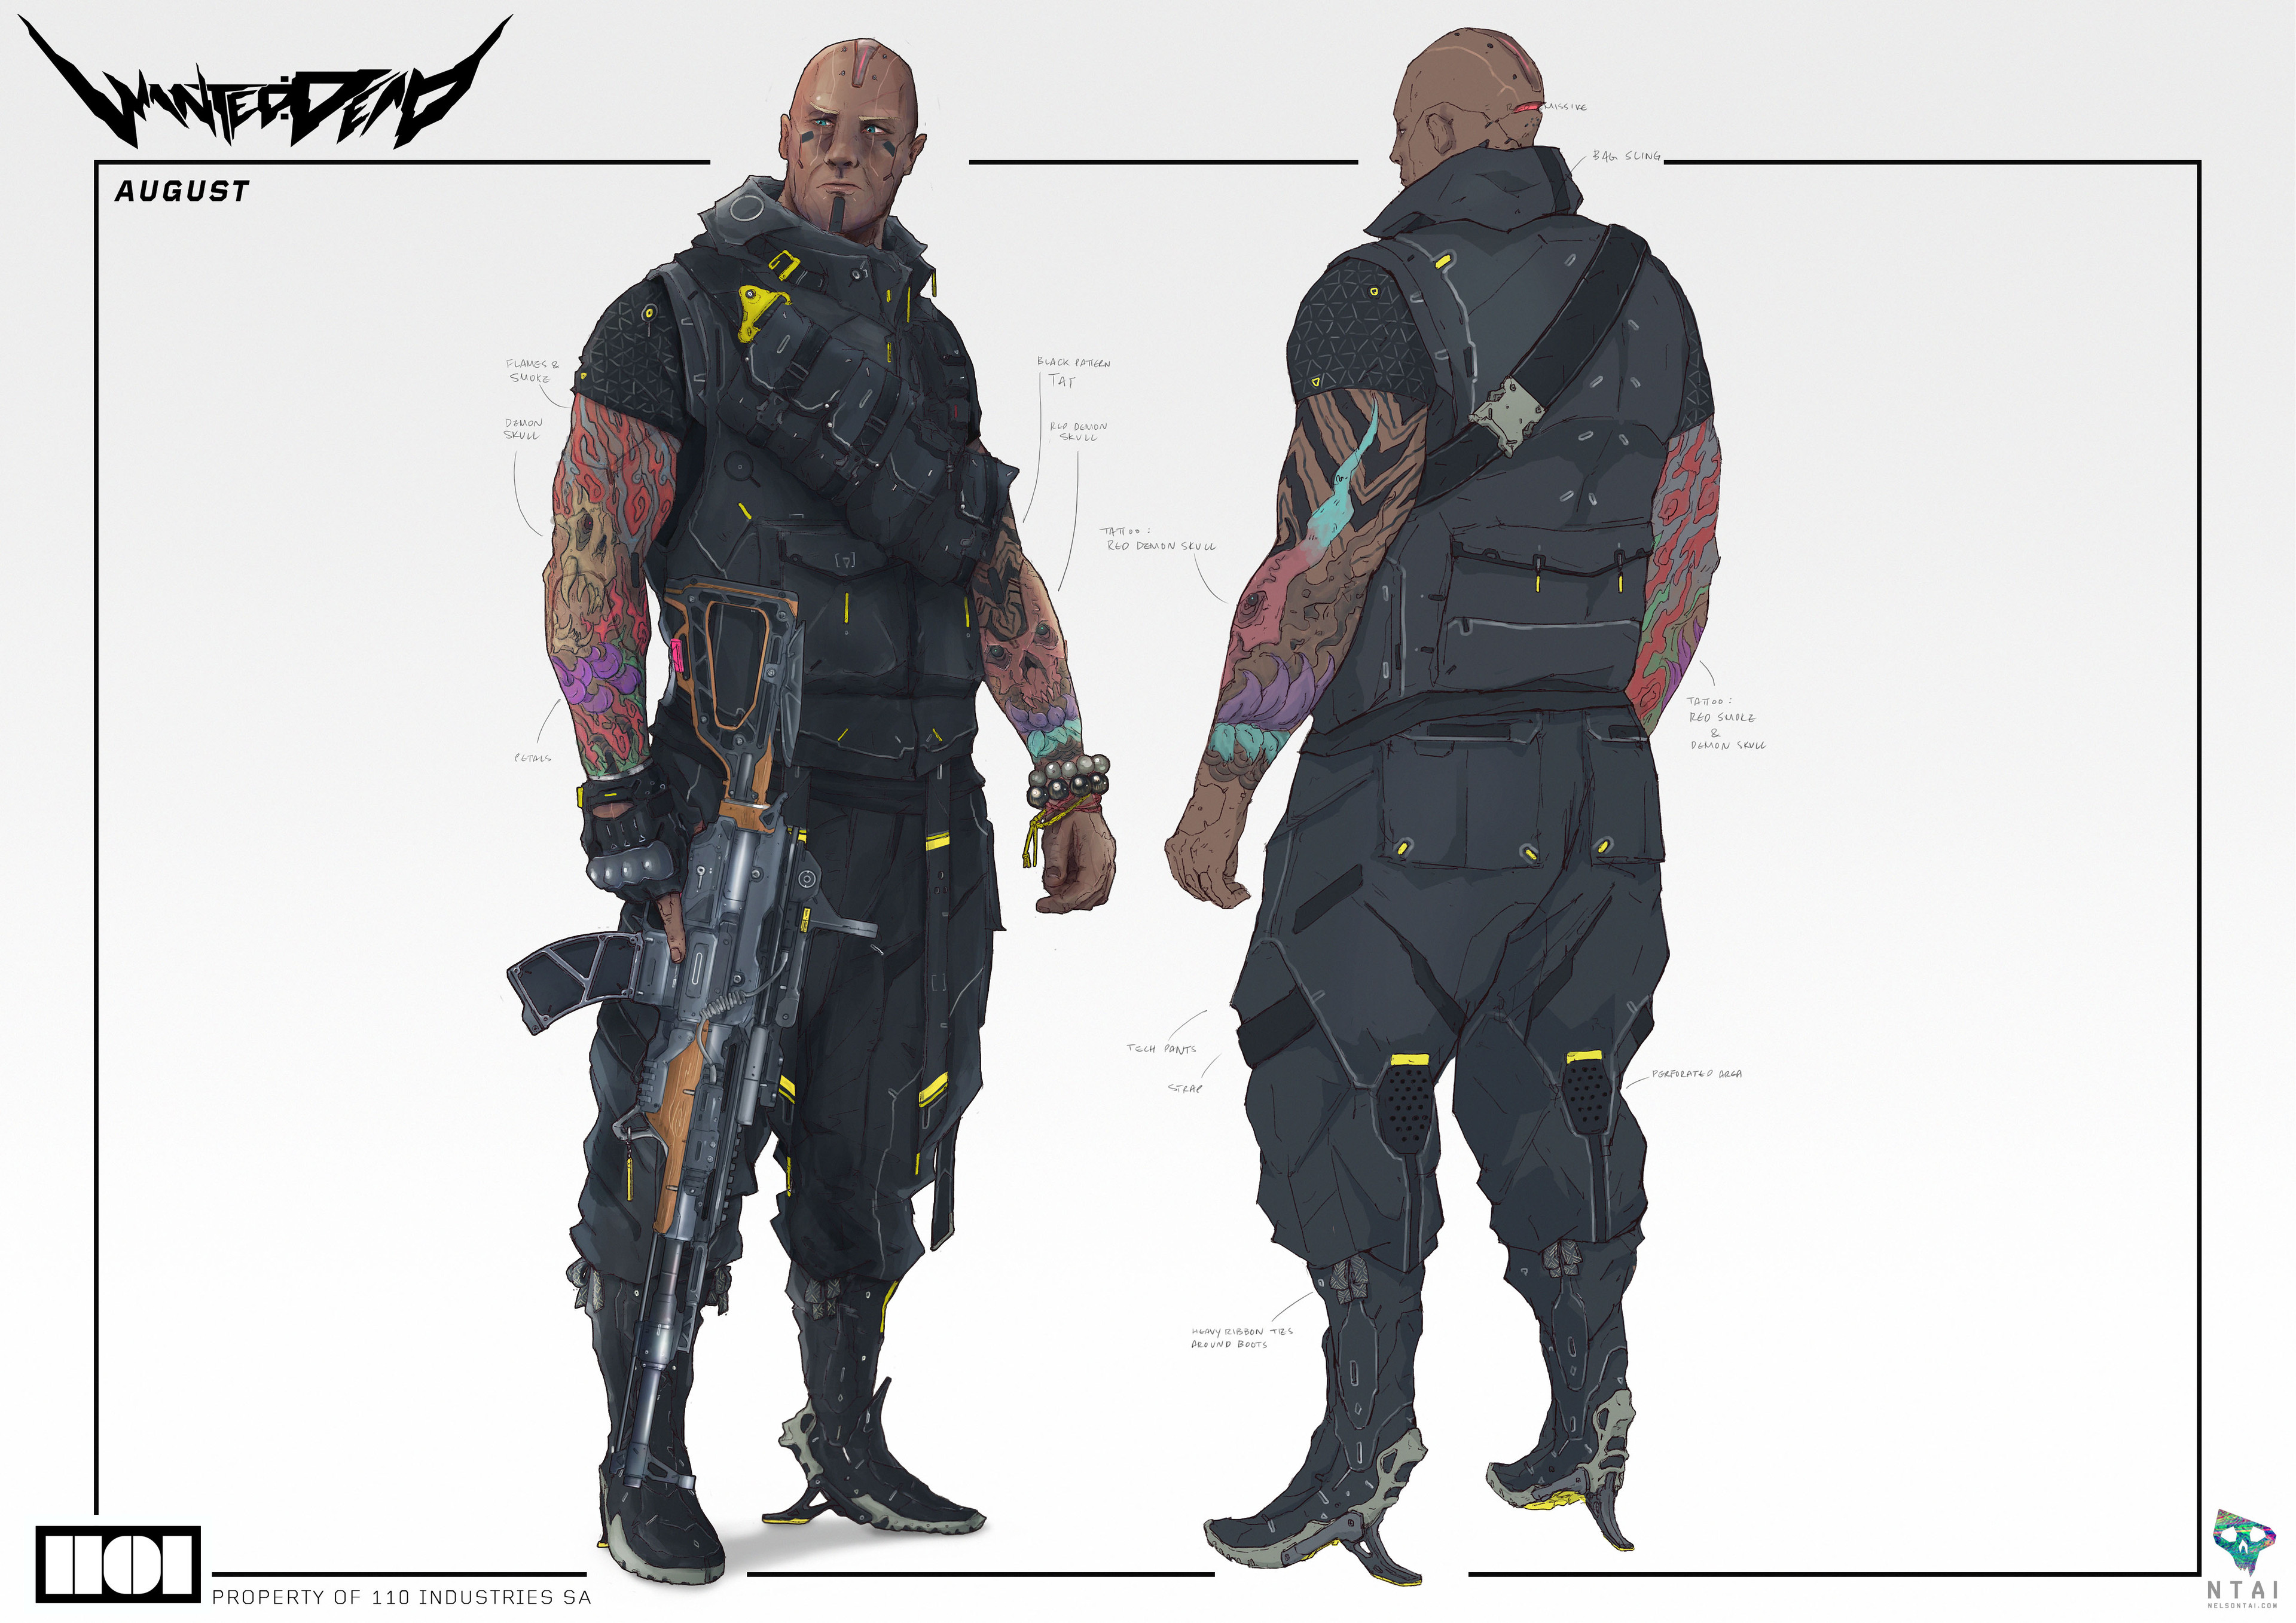 August is designed to be a big and strong warrior. Was fun to work out his futuristic tech / tactical outfit.